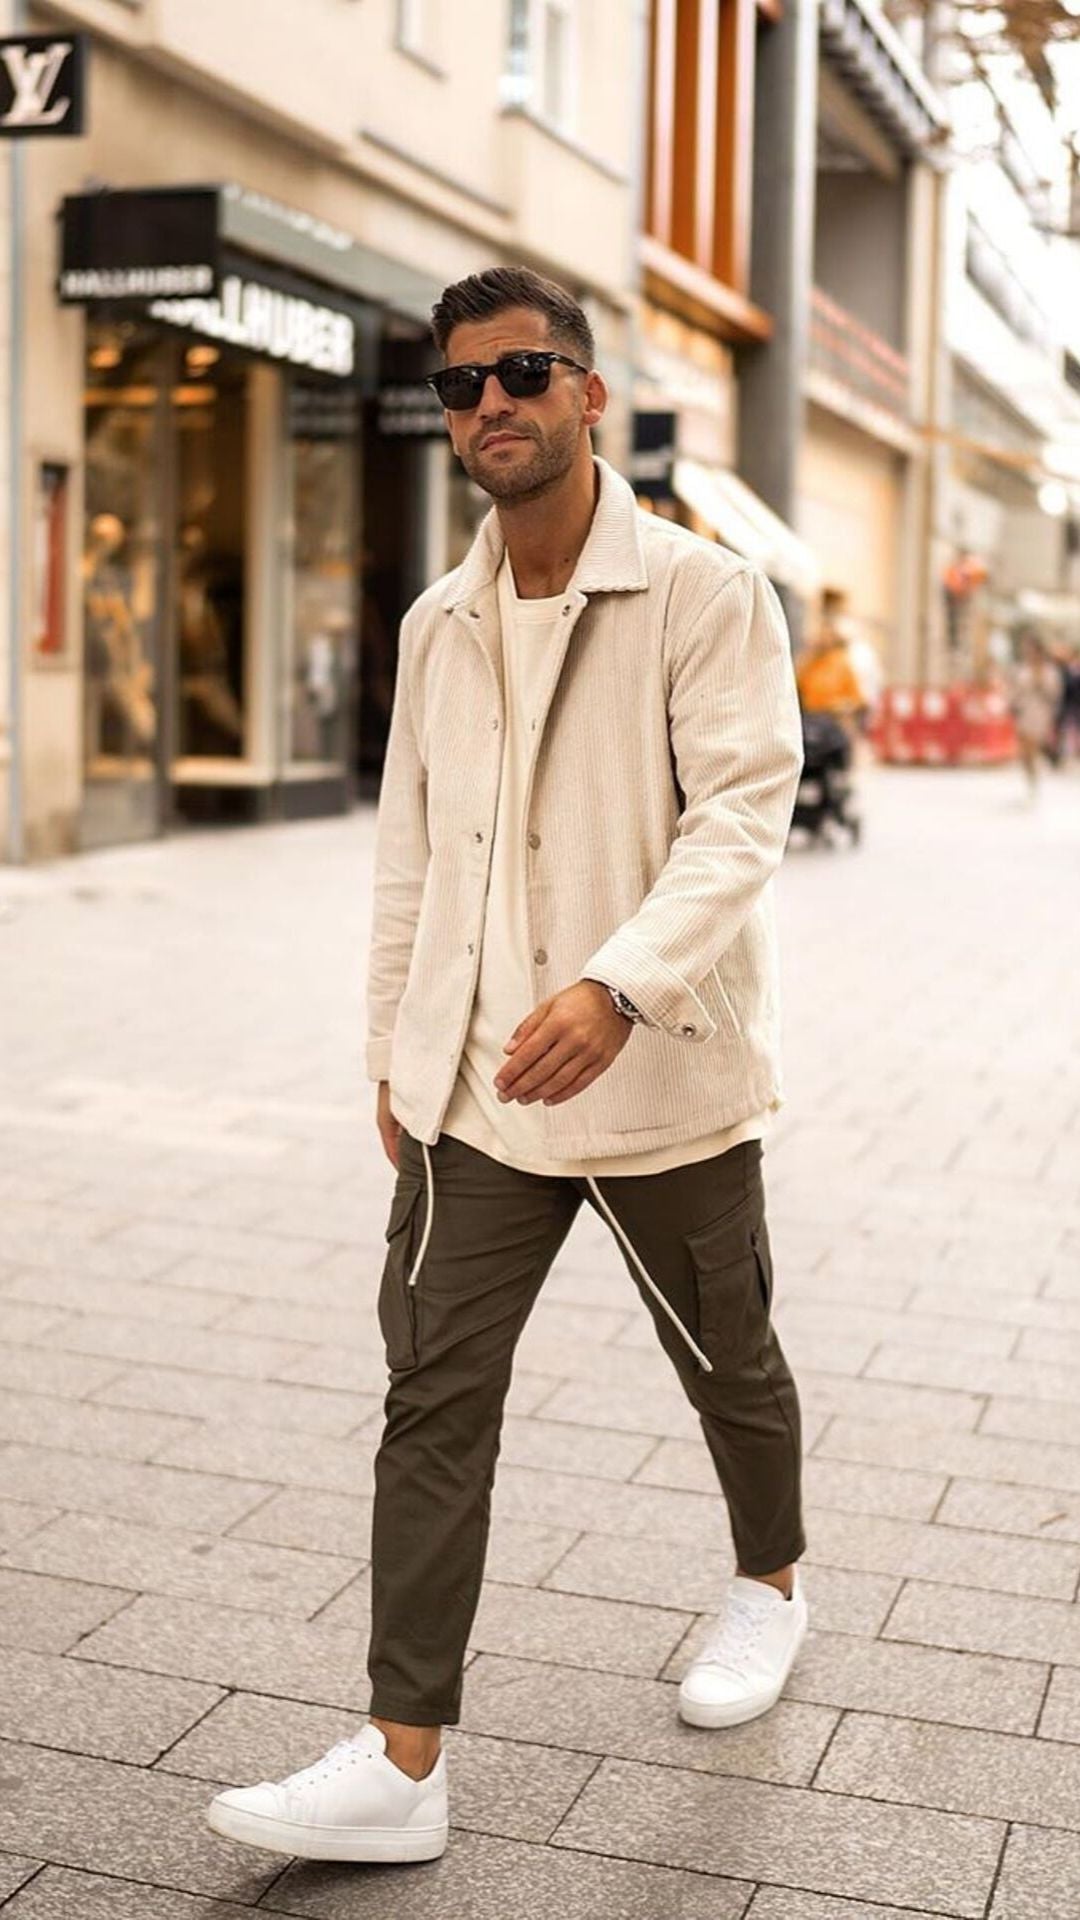 5 Casual Street Style Looks For Men #mens #fashion #street #style 